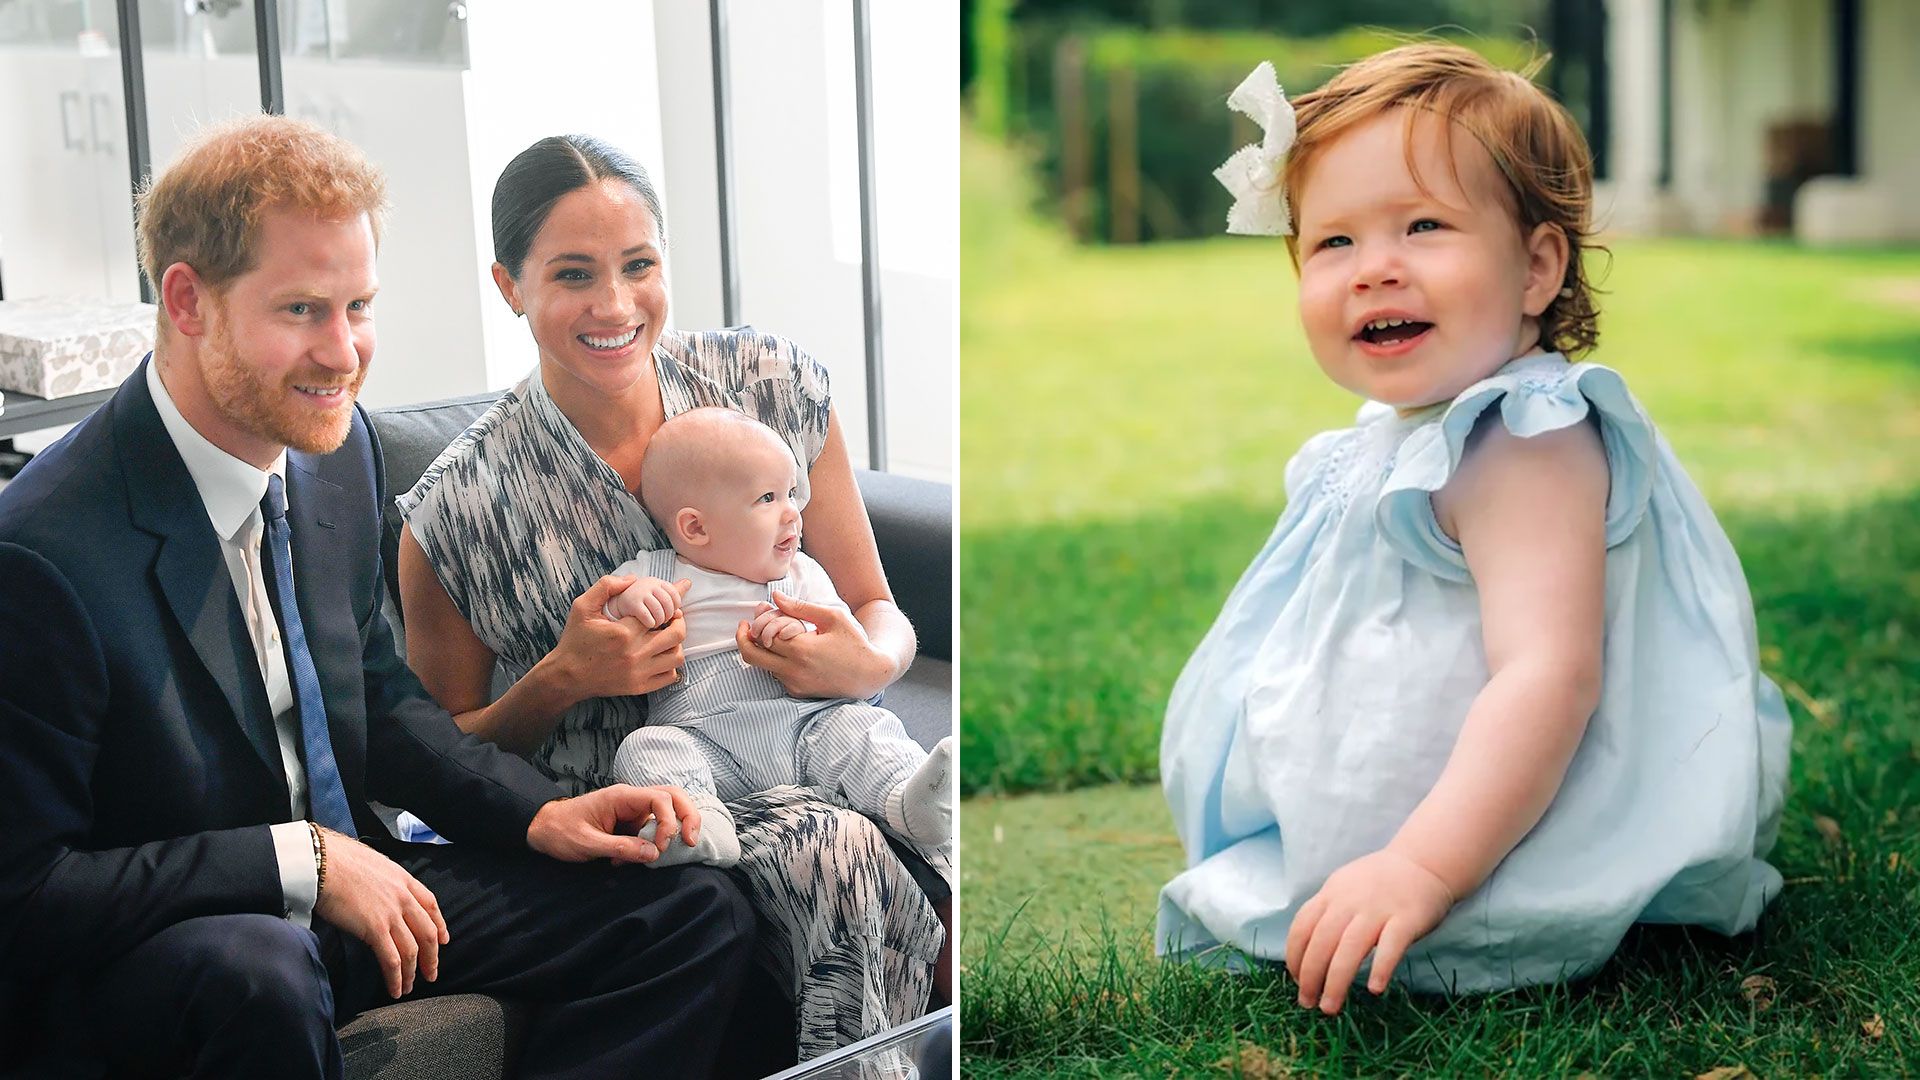 Meghan Markle's birth stories with Prince Archie and Princess Lilibet are poles apart